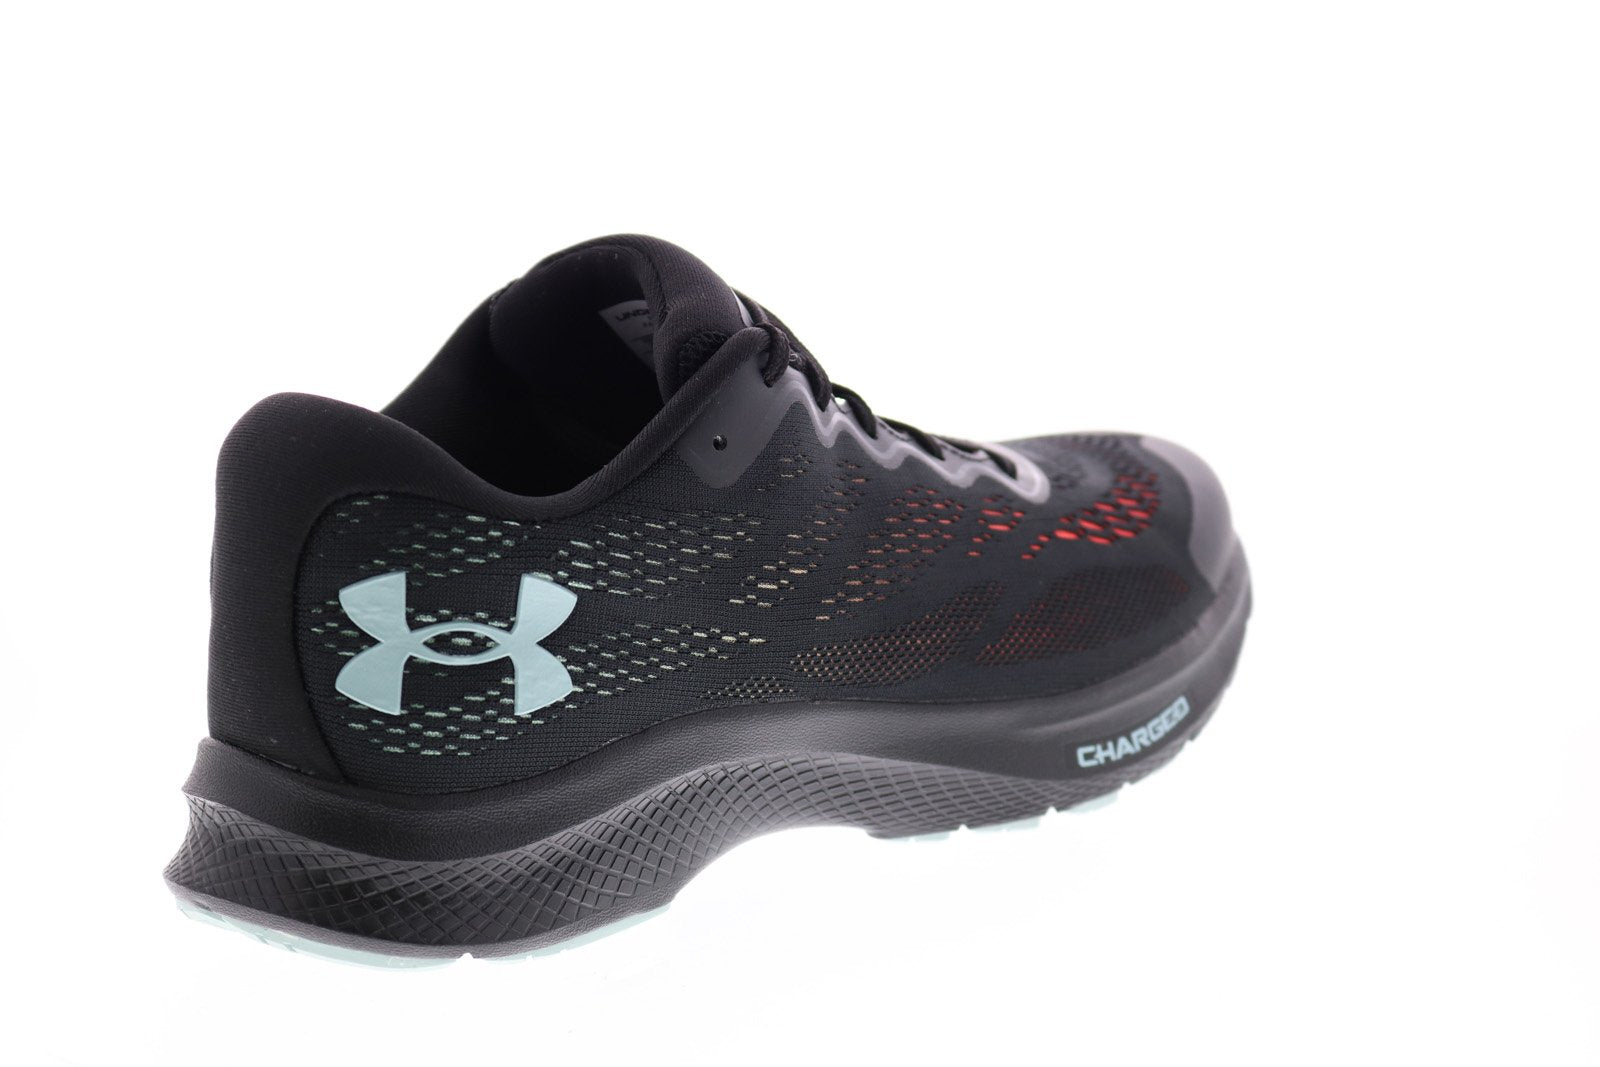 Under Armour Charged Bandit 6 Mens Black Mesh Lace Up Athletic Running ...